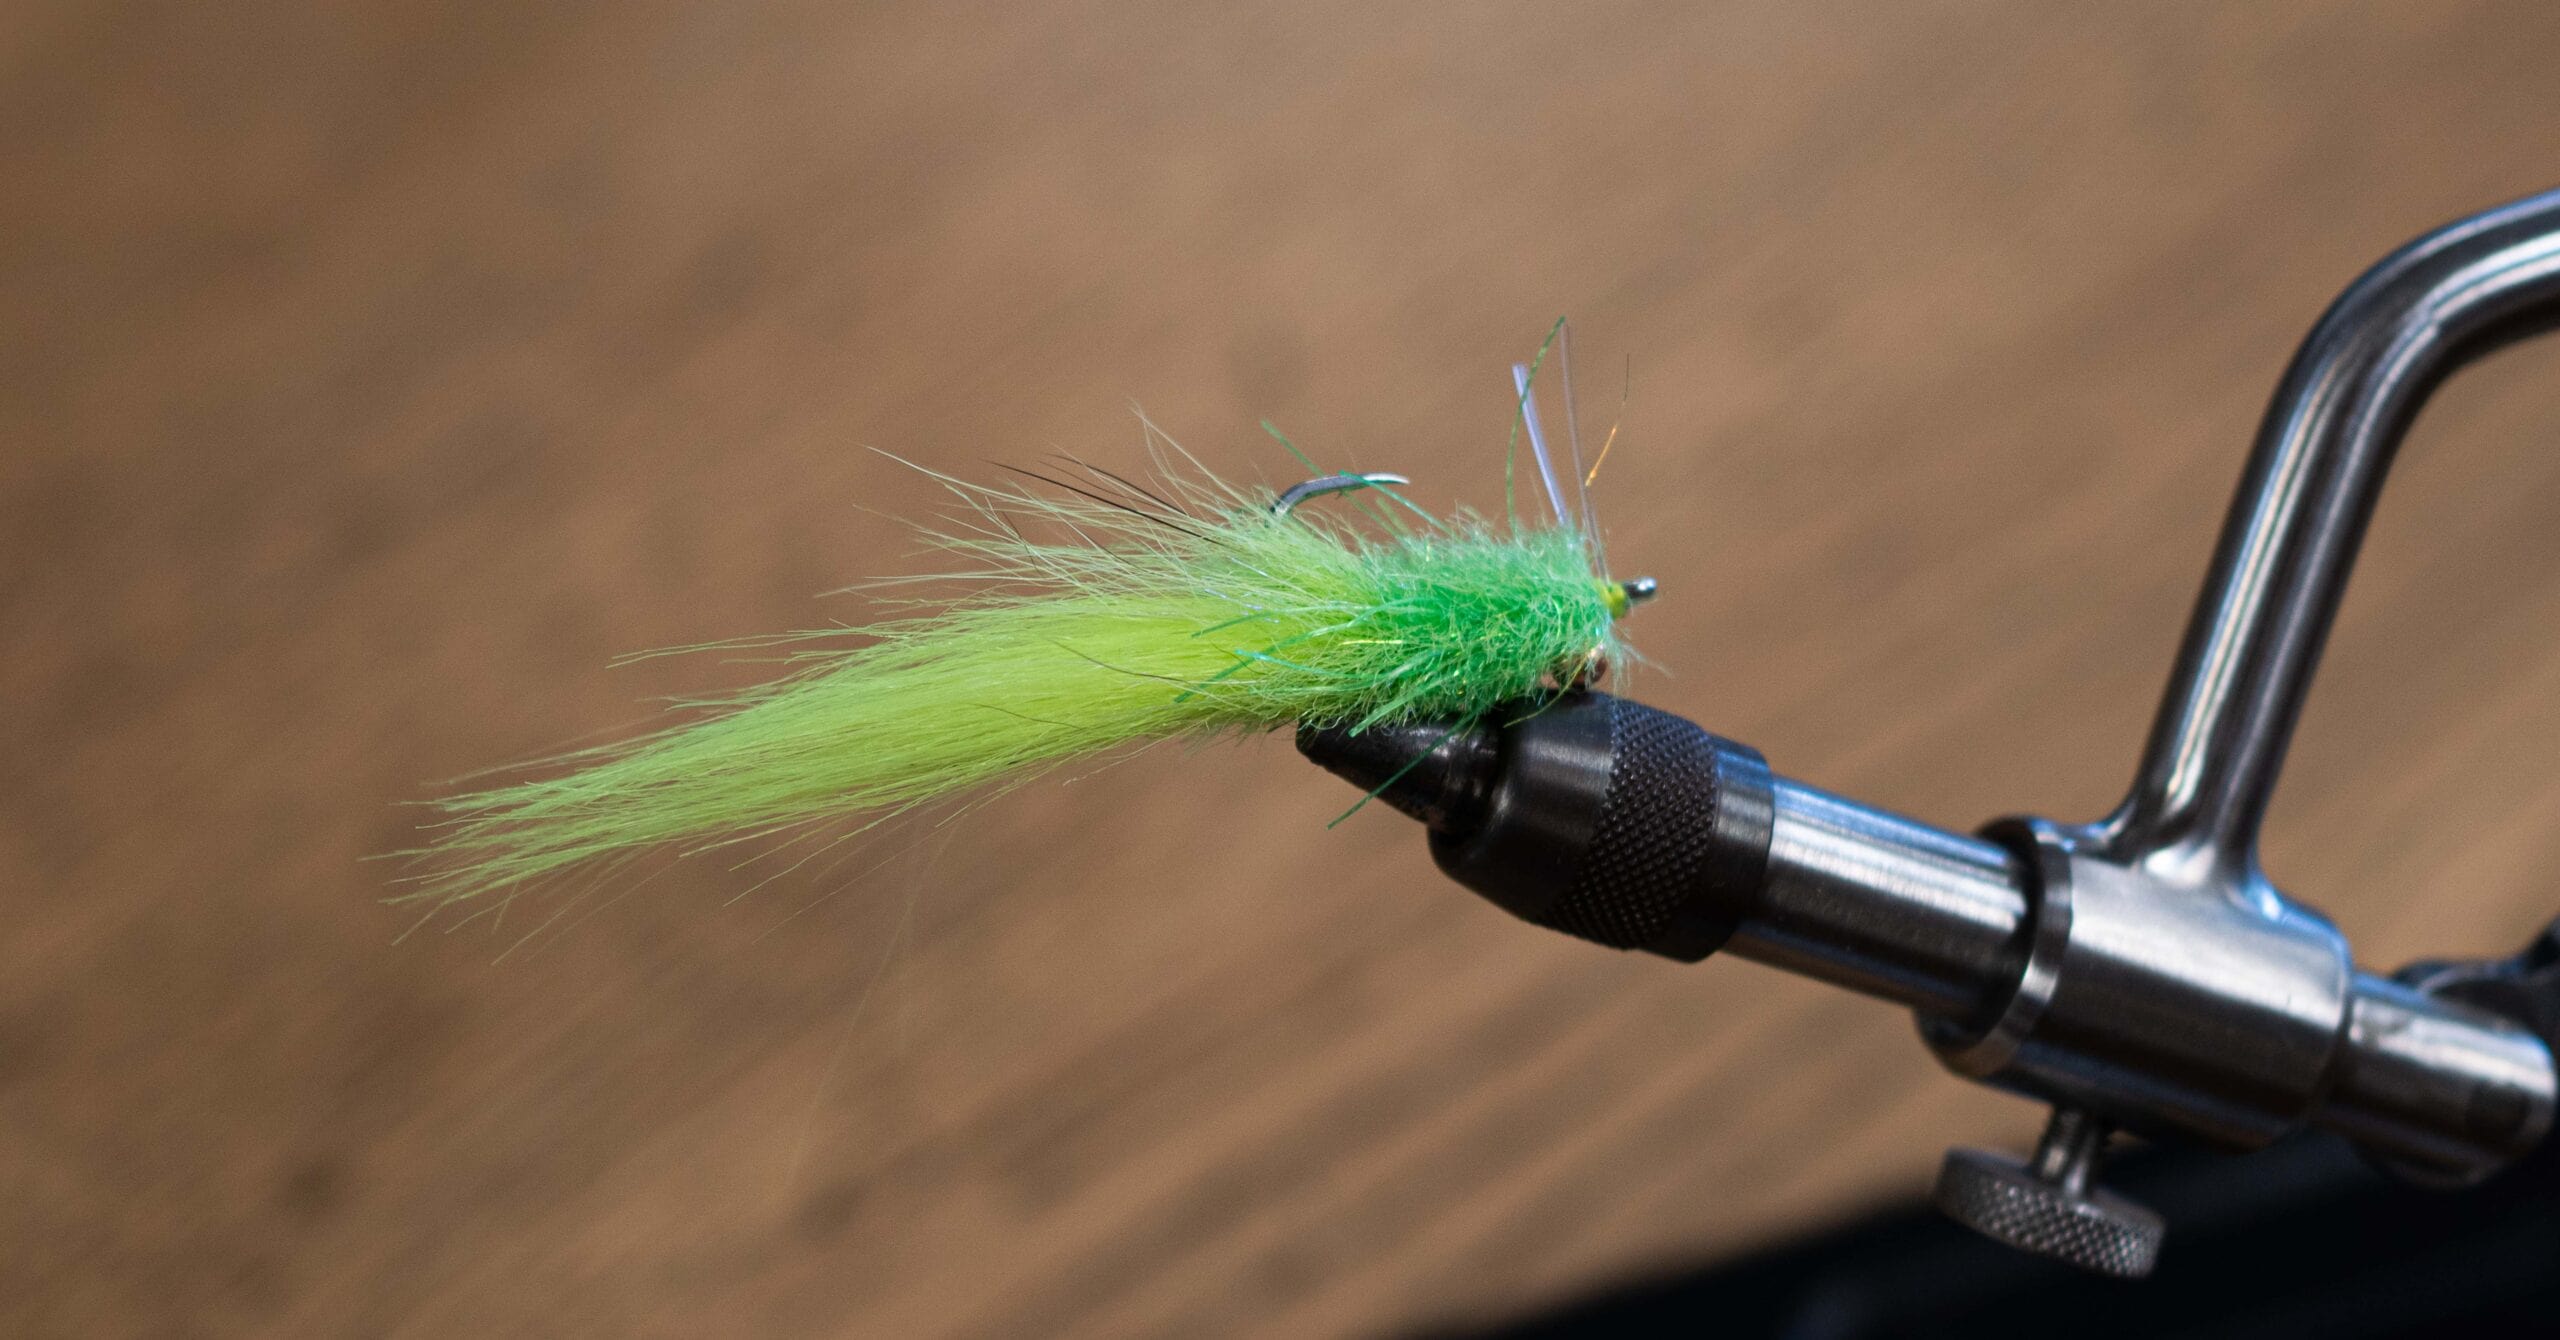 How To Tie: Pass's Guide Shrimp, The PERFECT Bonefish Fly